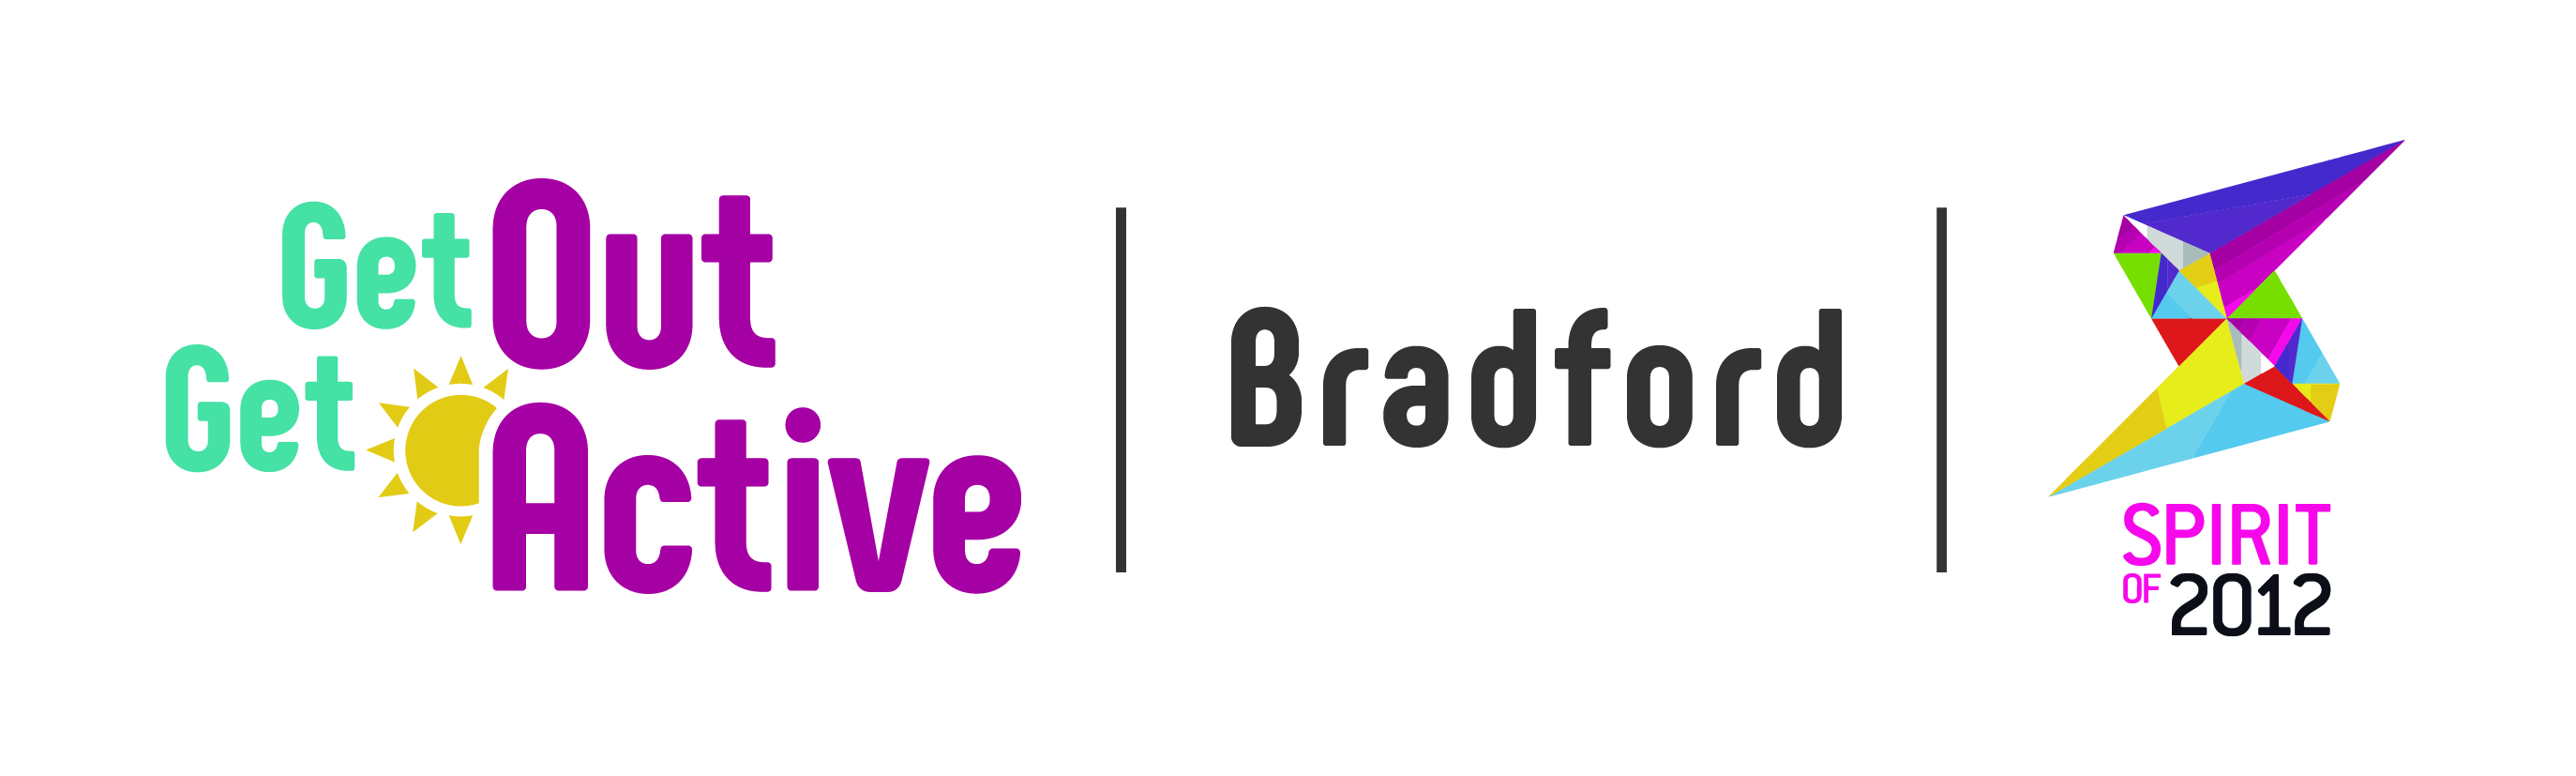 Get Out and Get Active Bradford